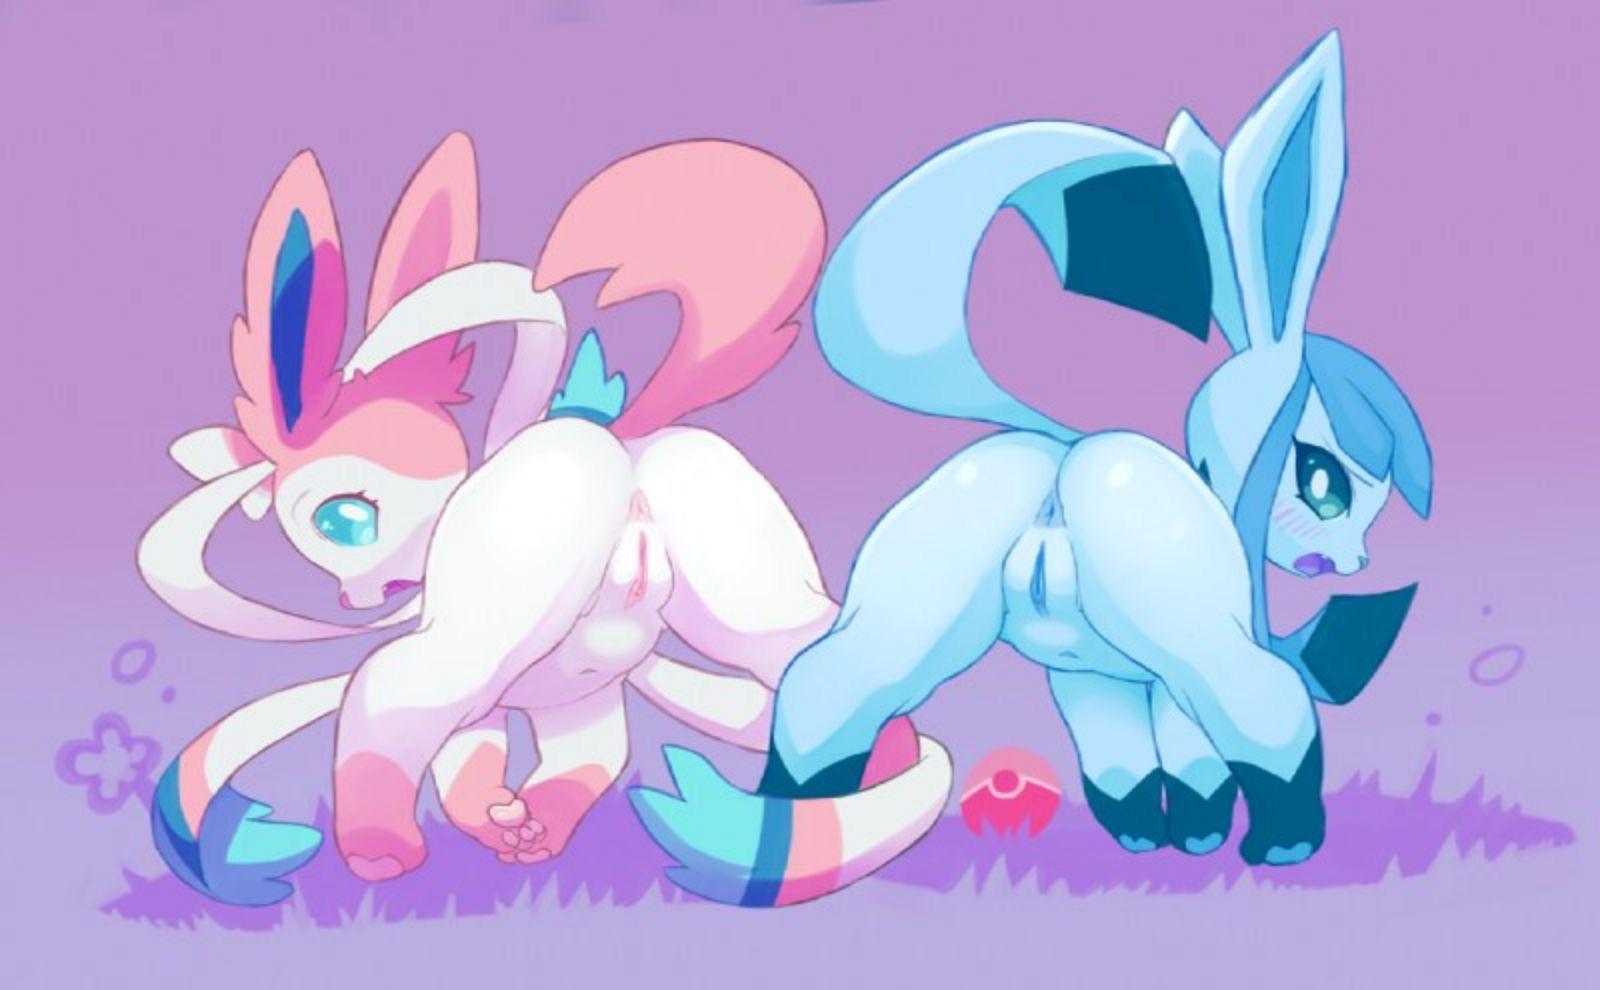 Glaceon Porn Pov - Glaceon xxx - Best adult videos and photos